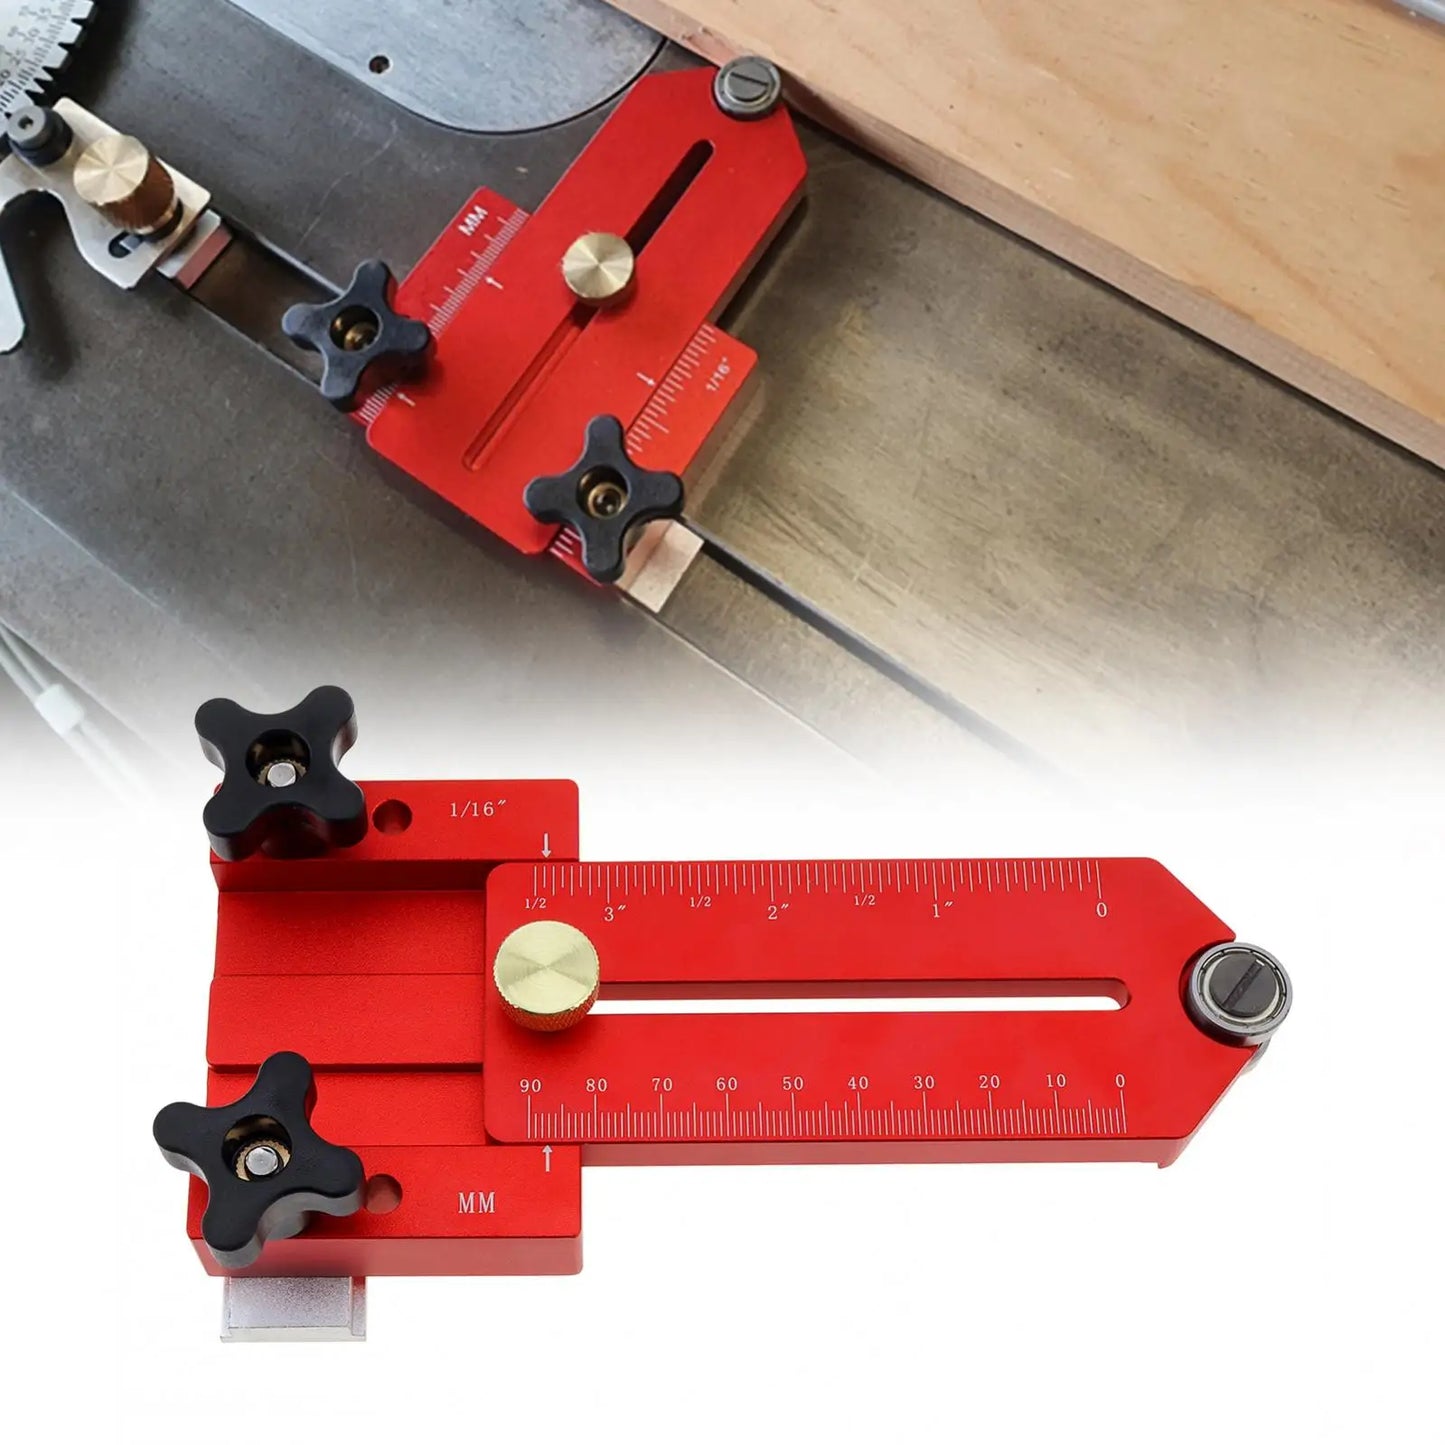 Extended Thin Rip Jig Guide Making Repetitive Narrow Strip Cuts Jig Guide